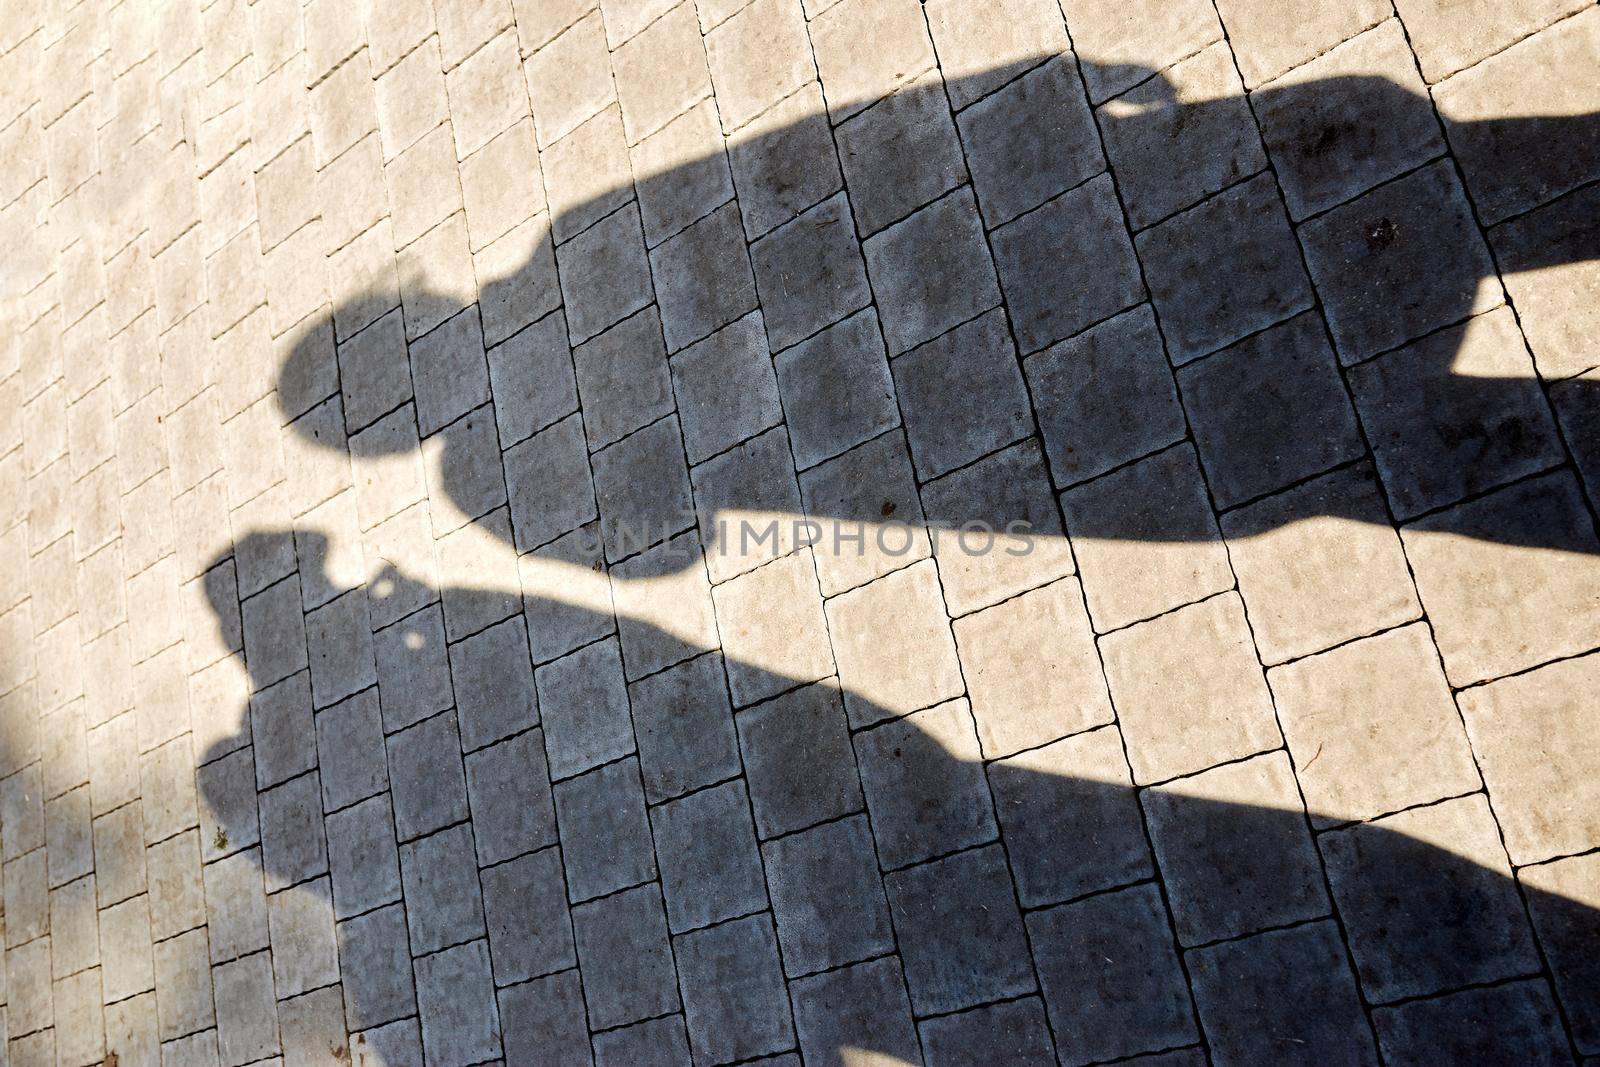 two shadows from figures on paving slabs by AliaksandrFilimonau